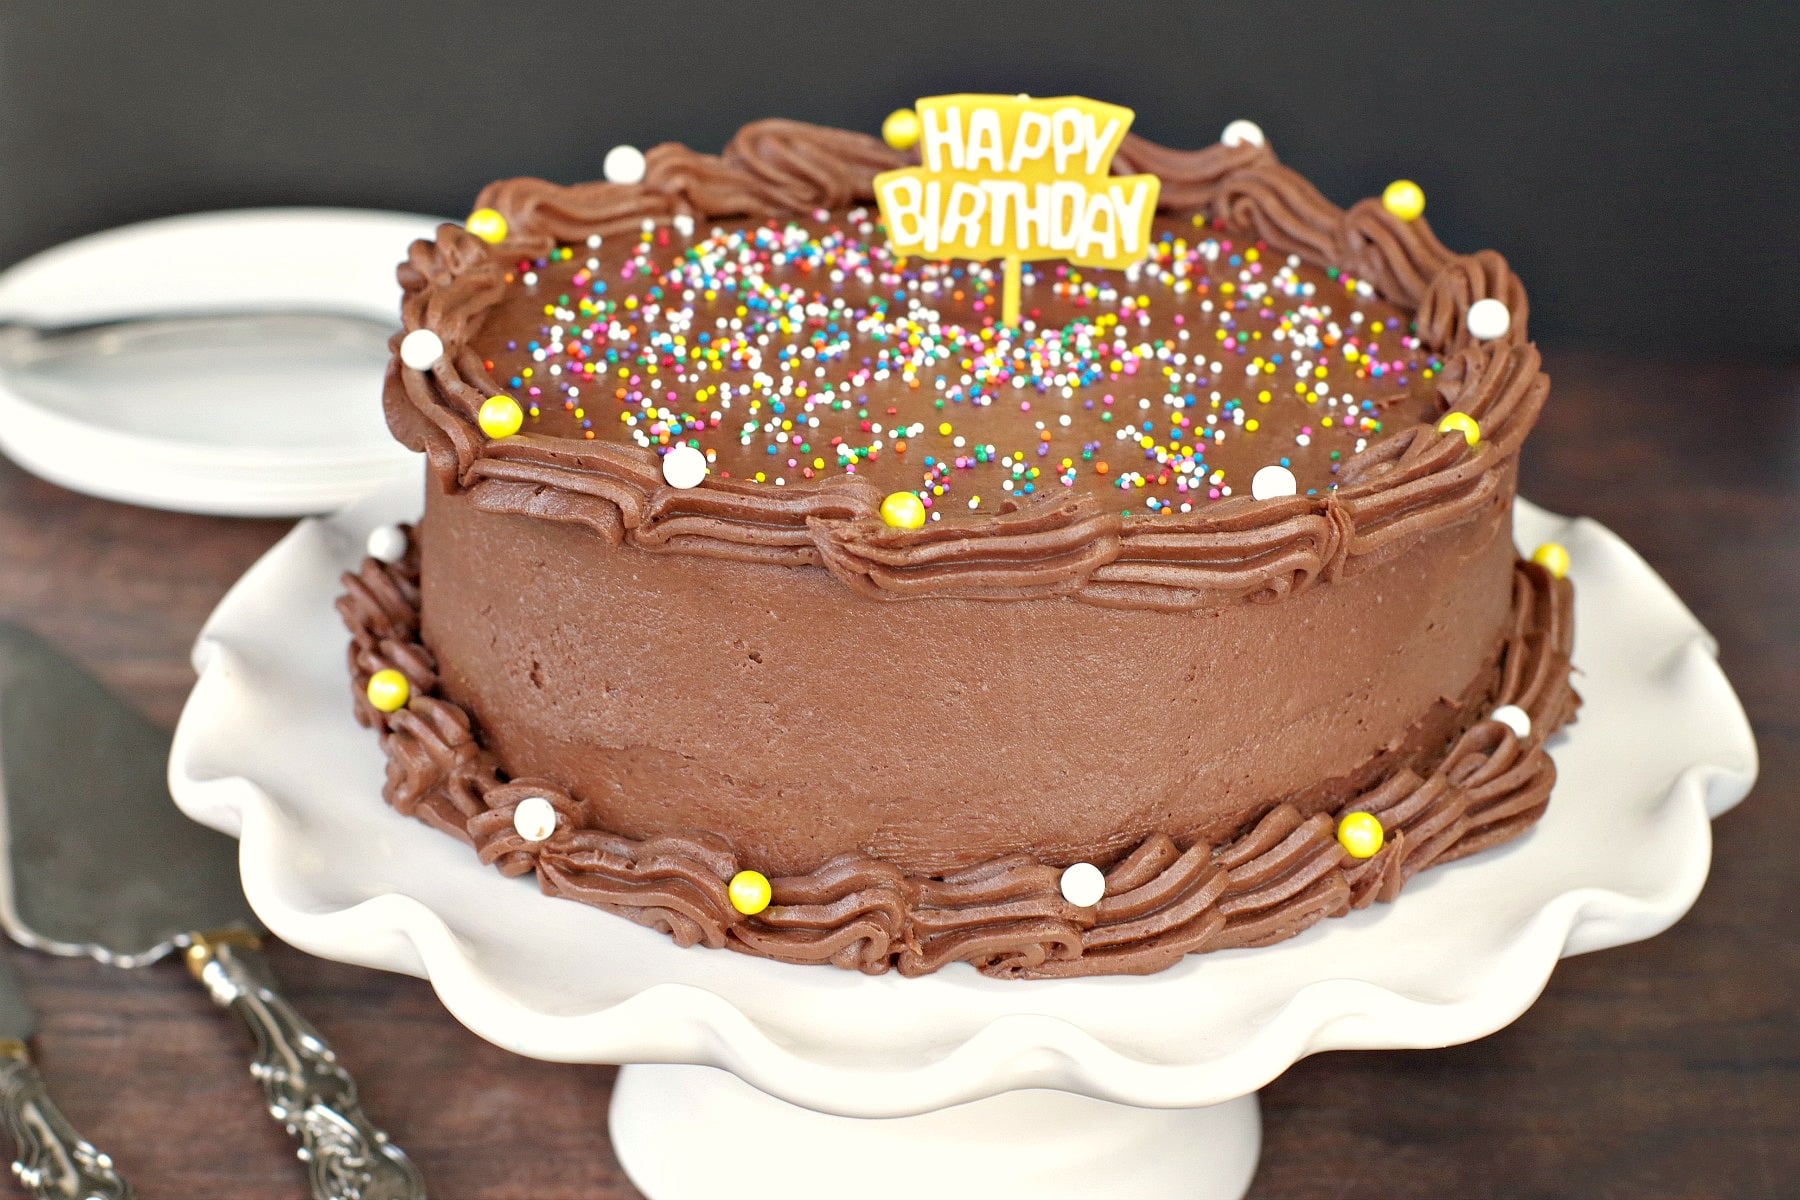 Old fashioned sour cream chocolate cake with no butter chocolate icing birthday cake